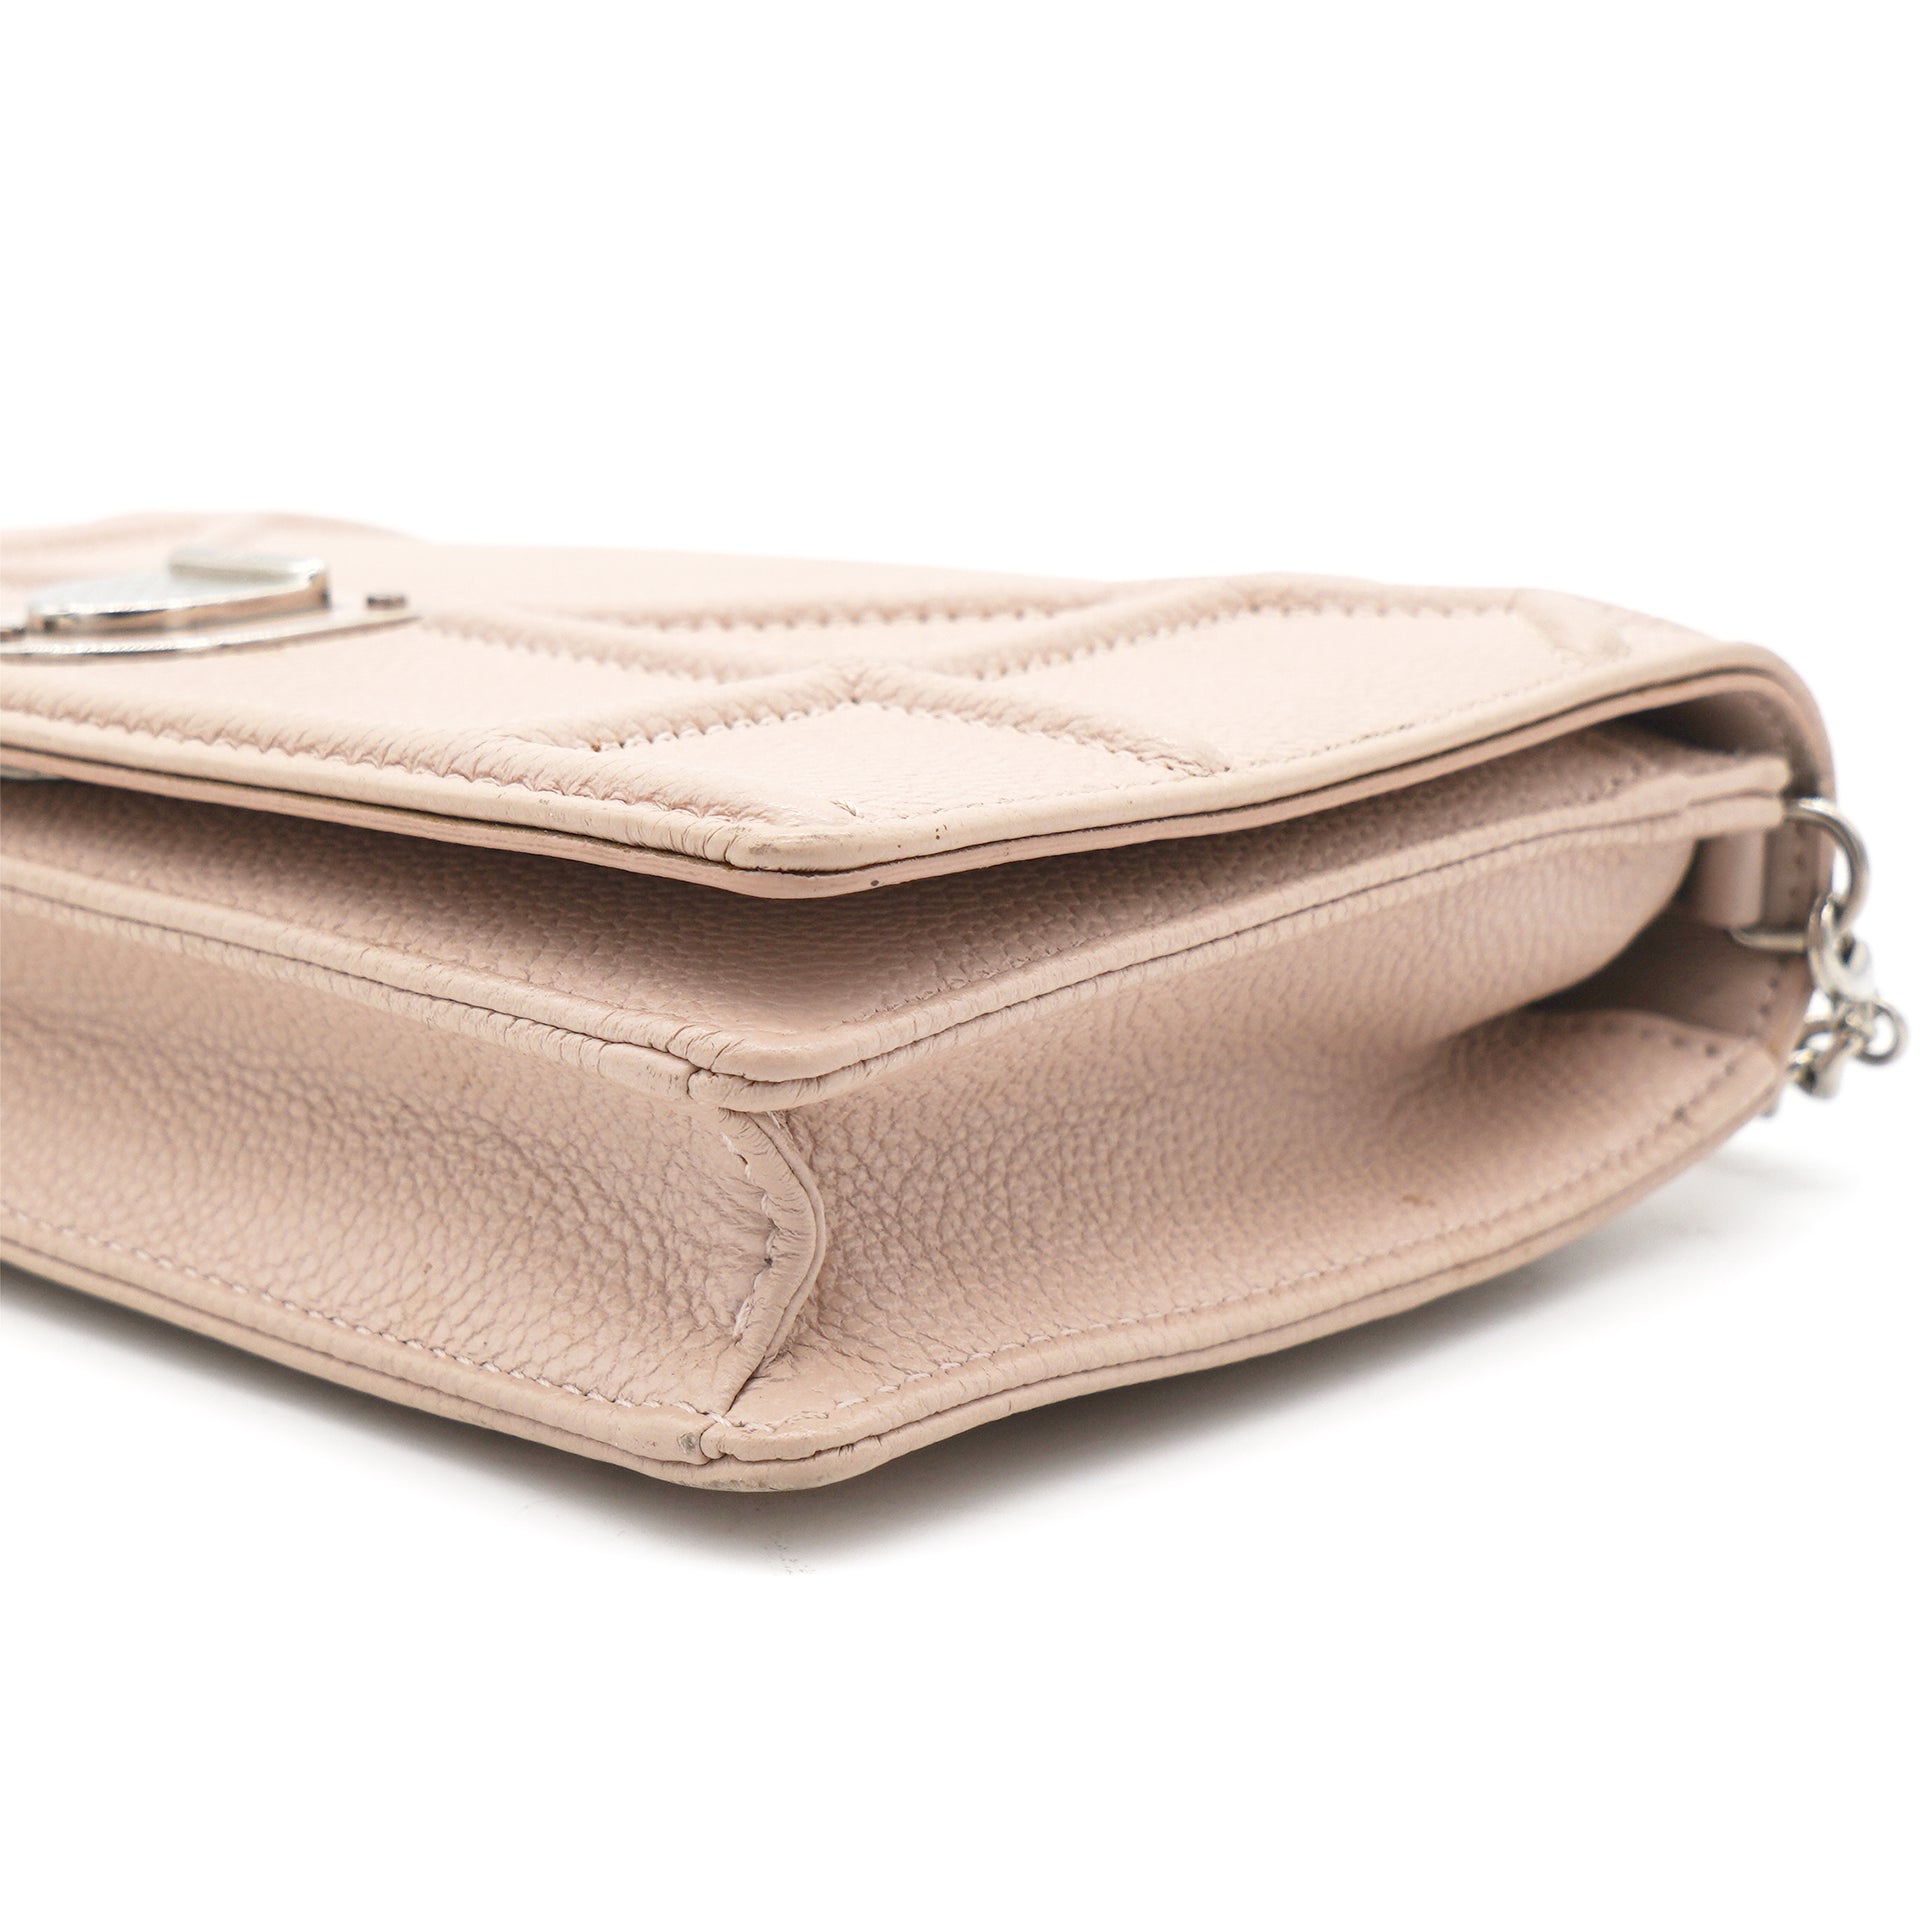 Light Pink Leather Diorama Wallet on Chain